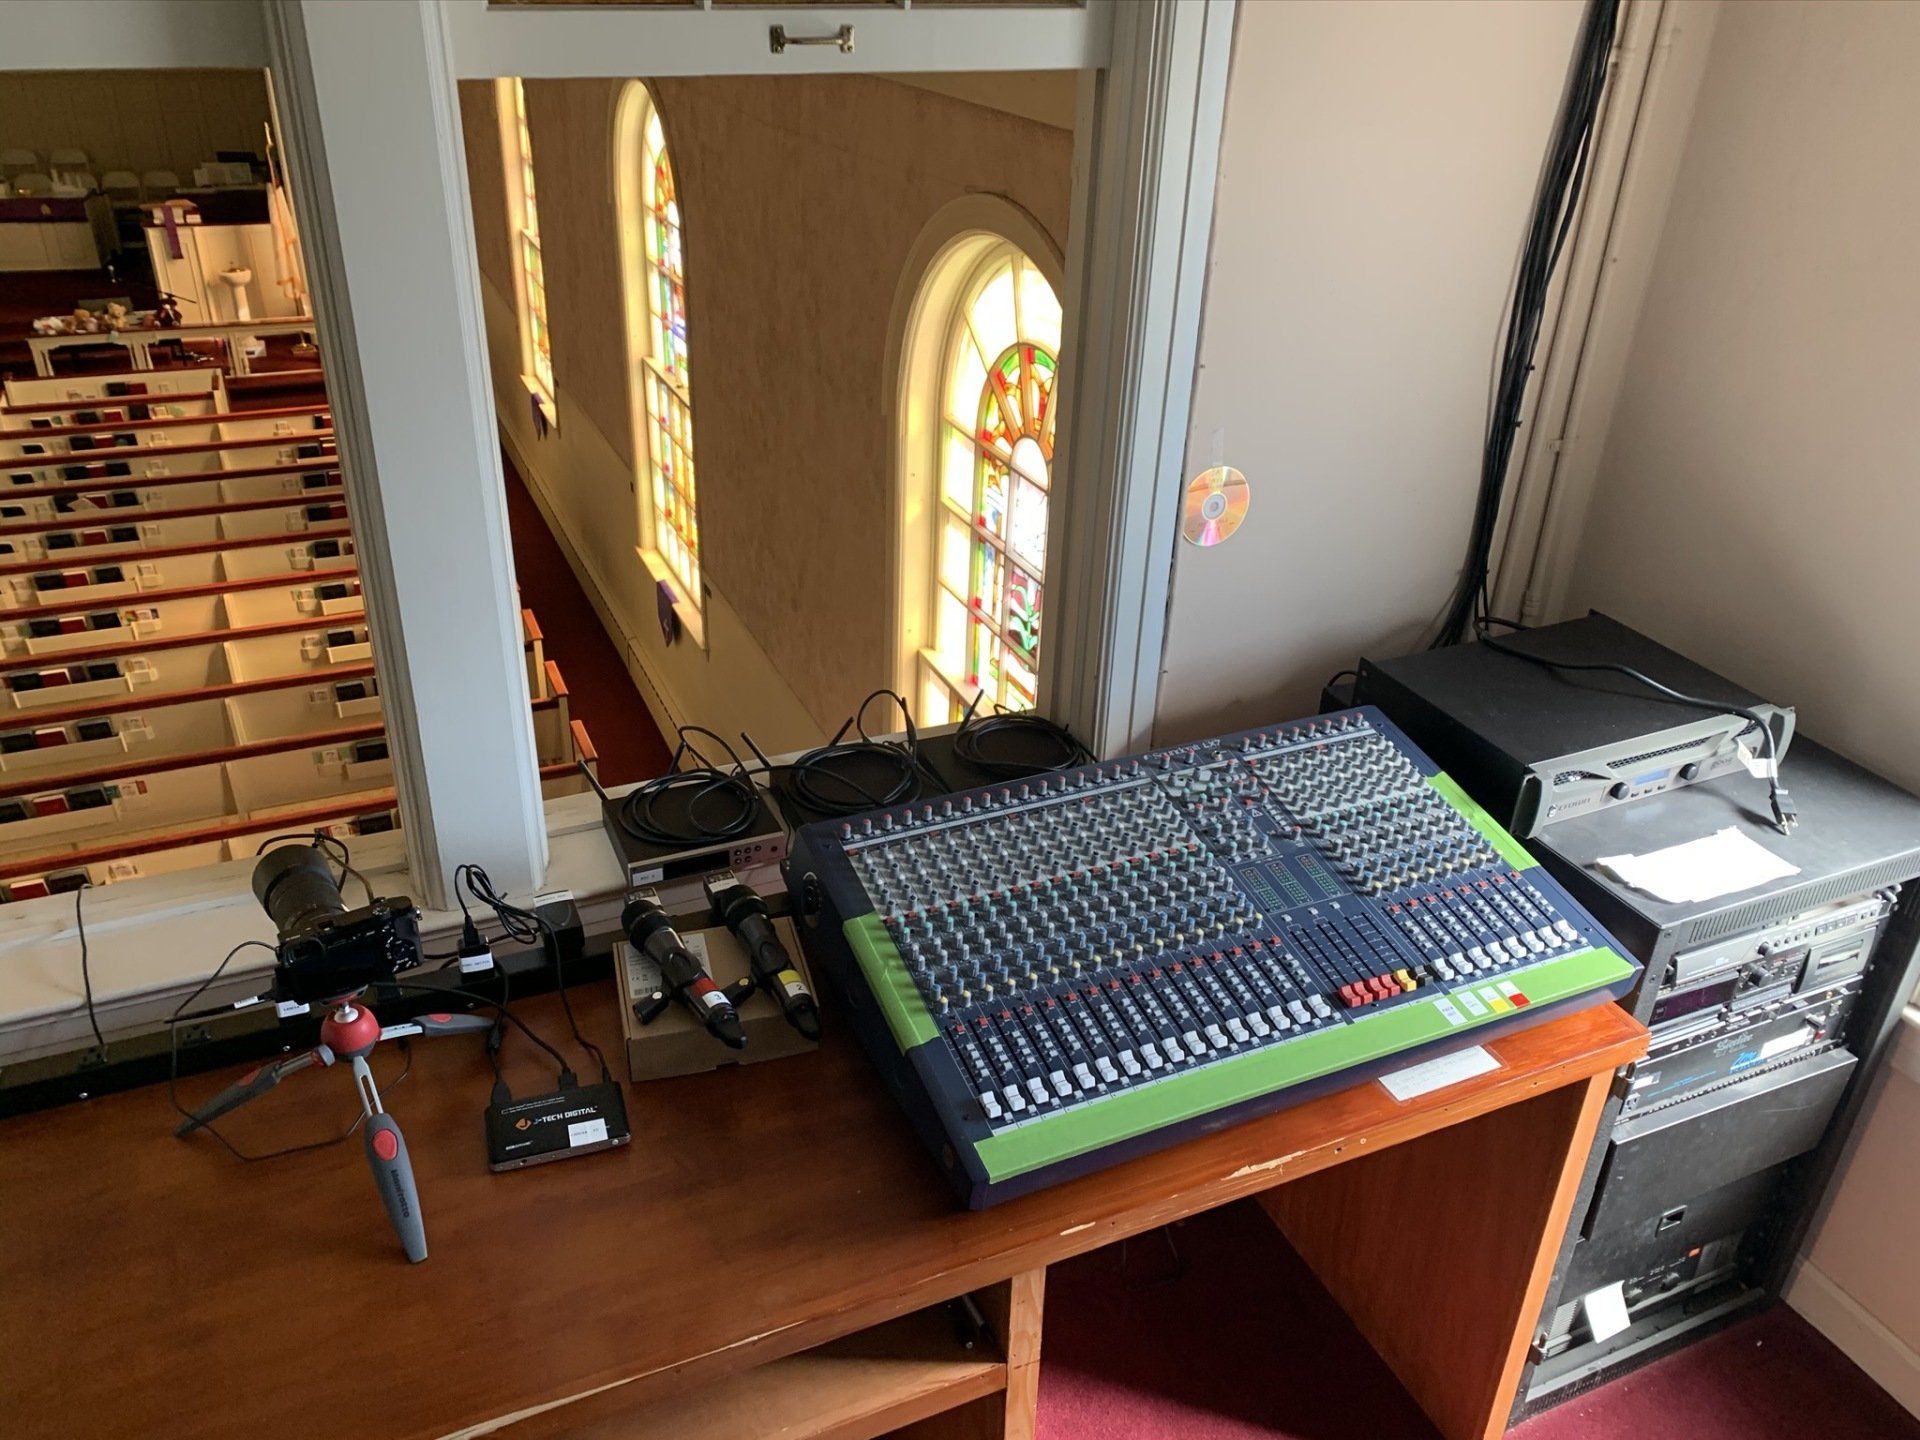 A mixer is sitting on a wooden desk in a church.